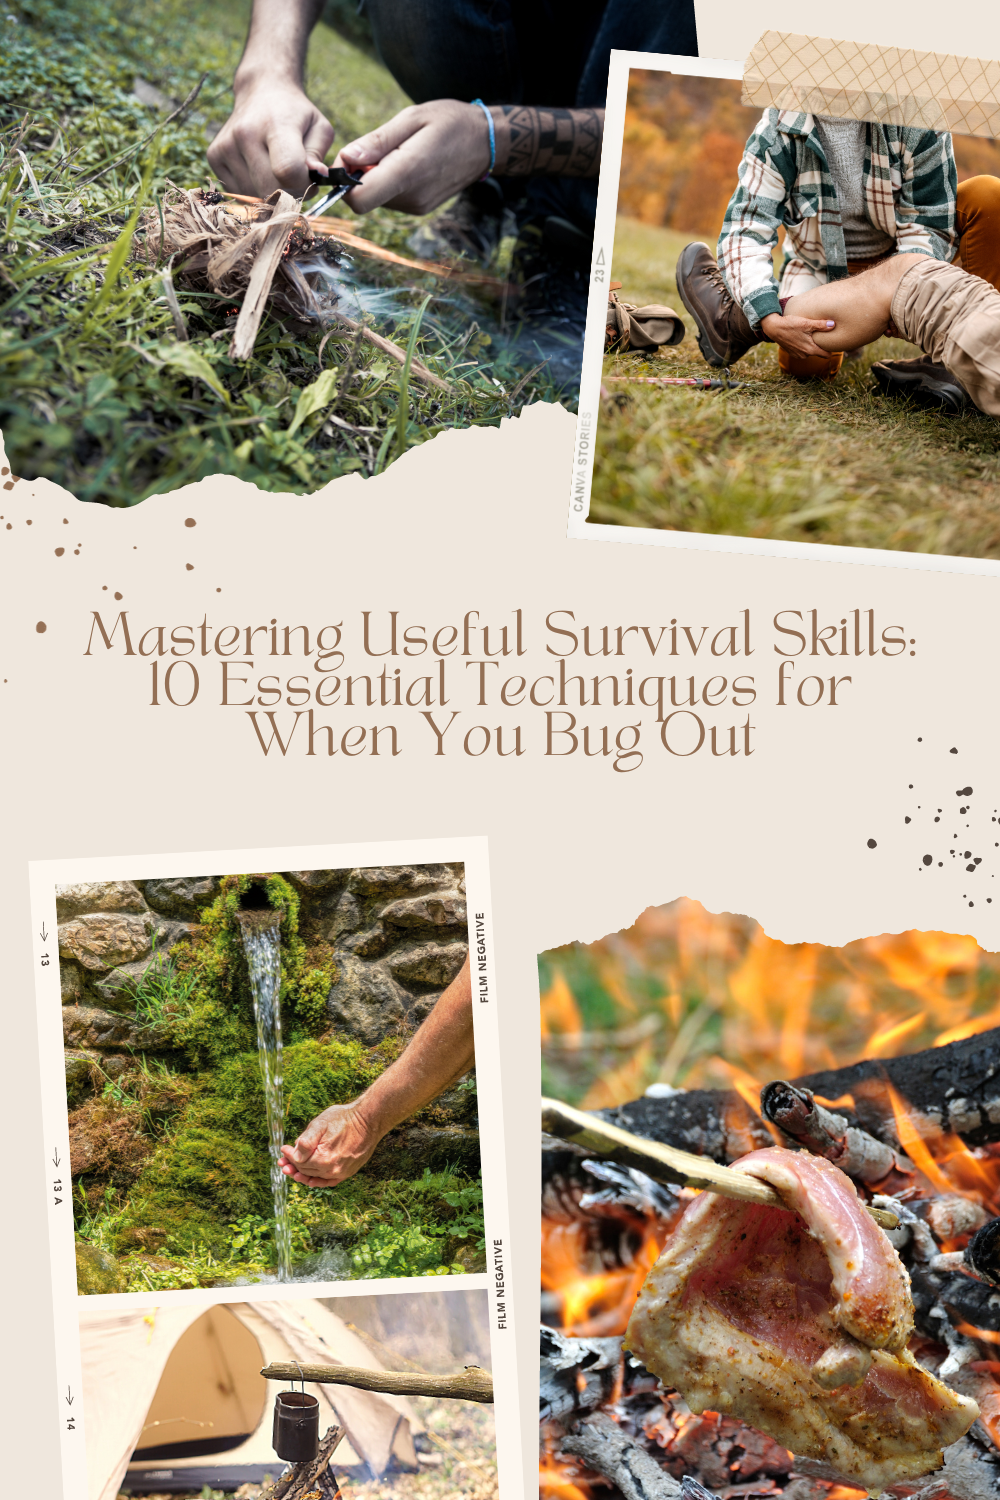 Various images of survival scenarios such as finding clean water, starting a fire, cooking over an open fire, applying basic first aid, etc.